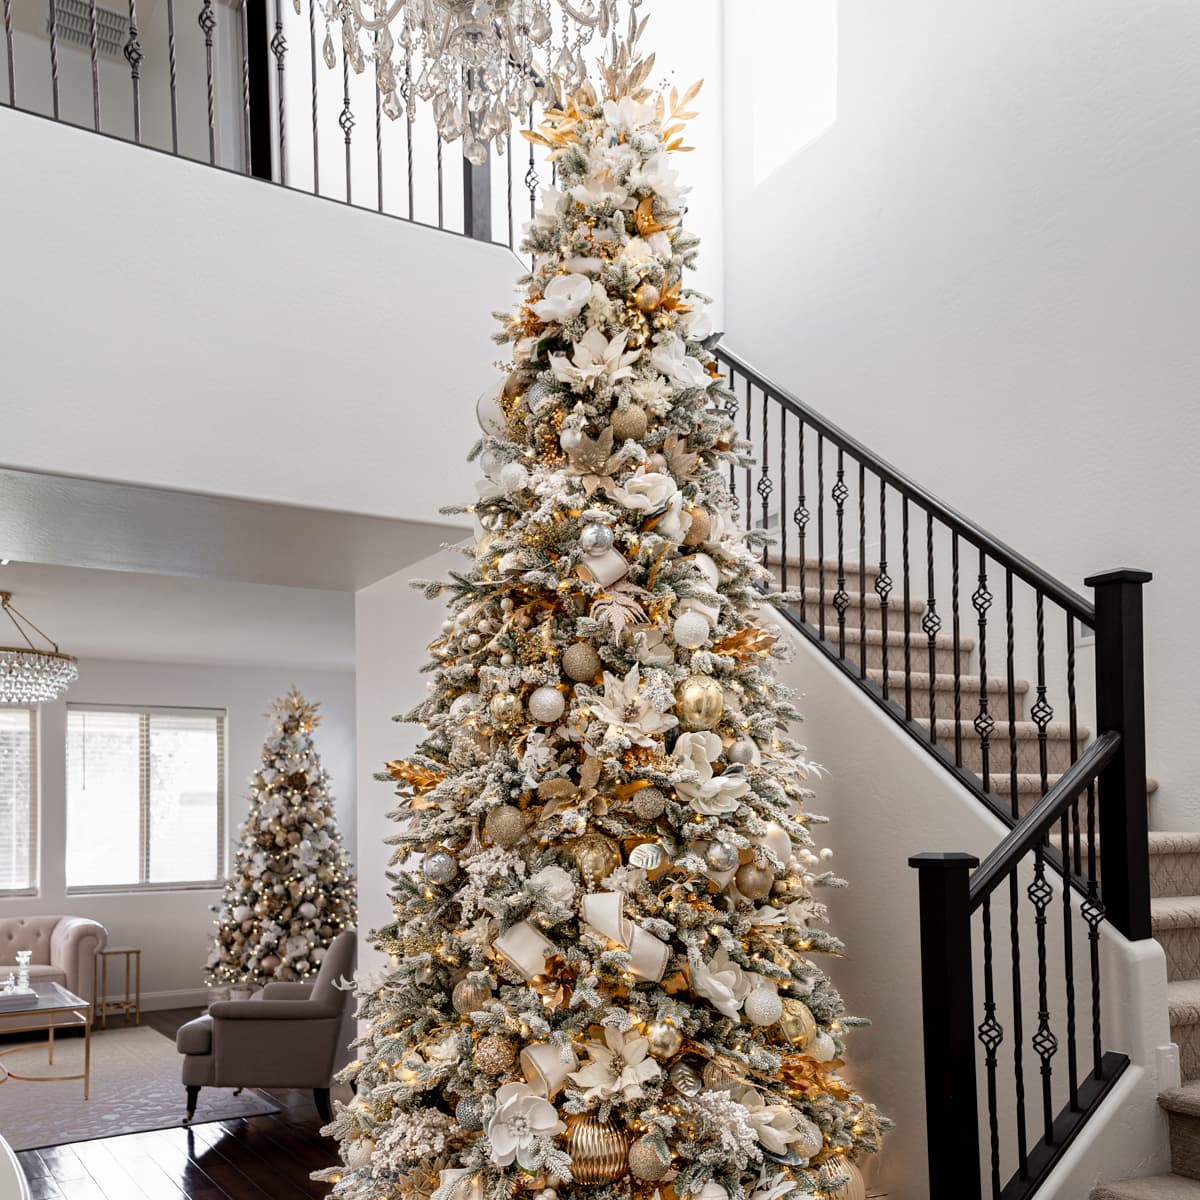 Hiring a decorator for Christmas: Tips for getting the look for less